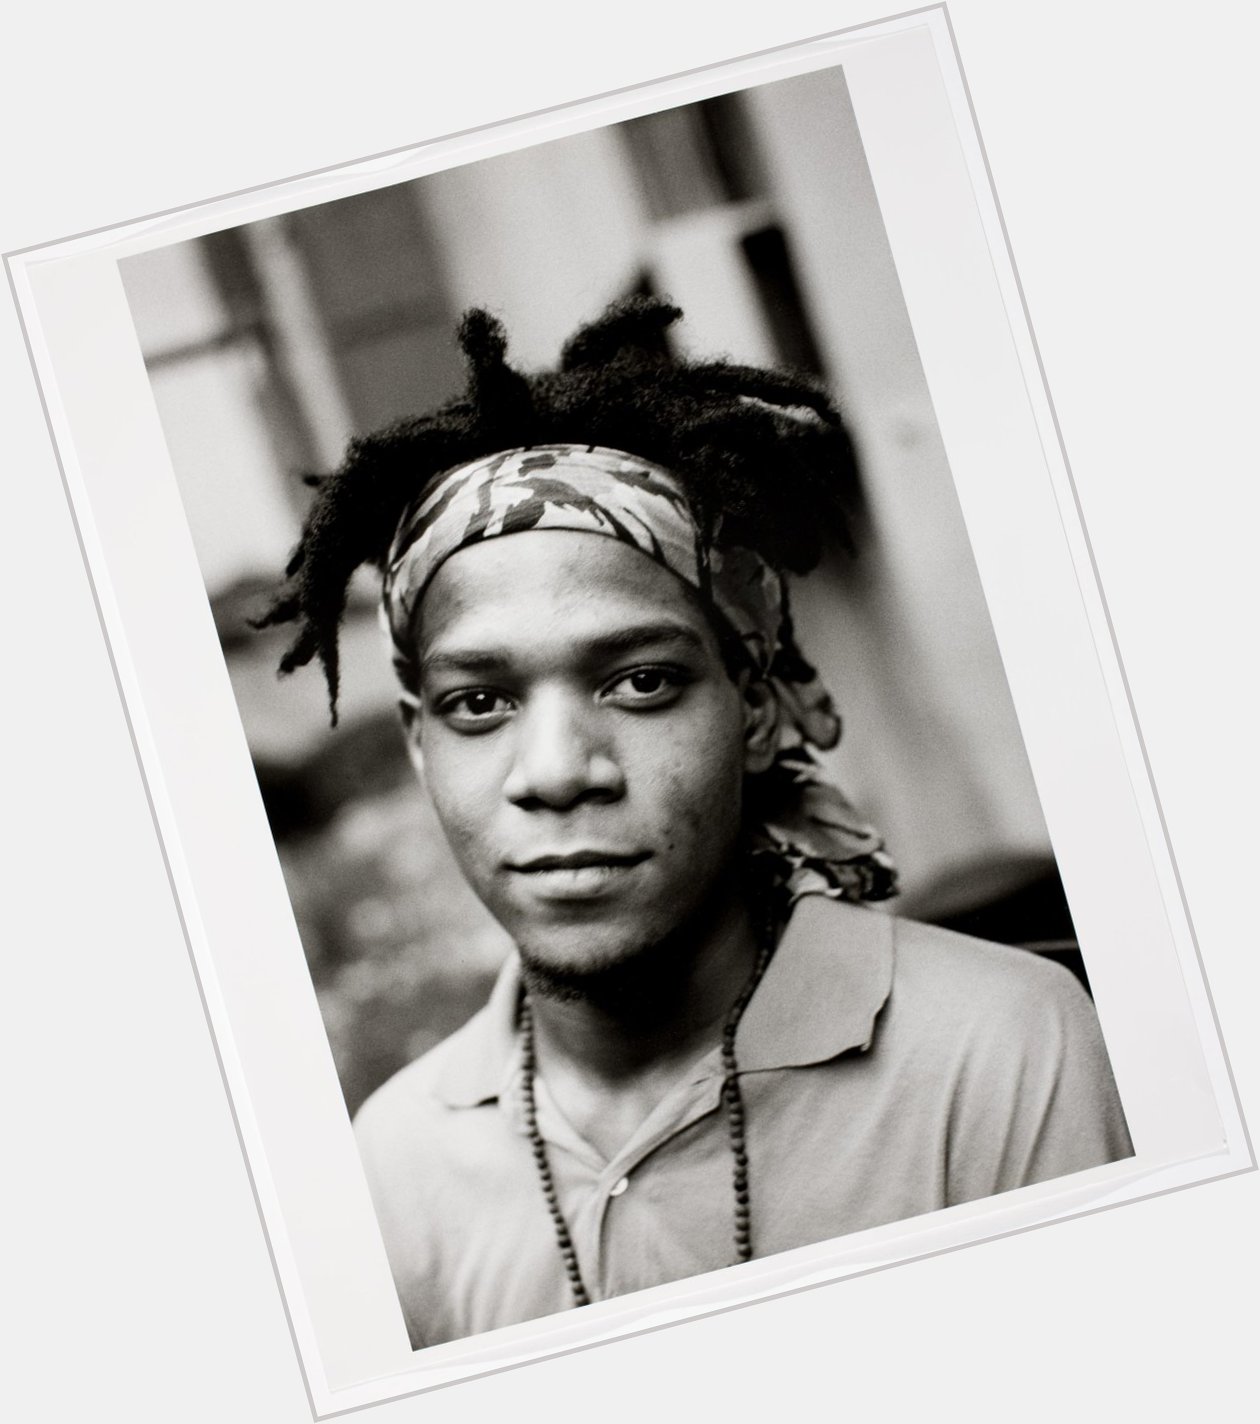 Happy bday to Jean-Michel Basquiat, who was born in 1960. See his masterpieces in @ the DIA! 